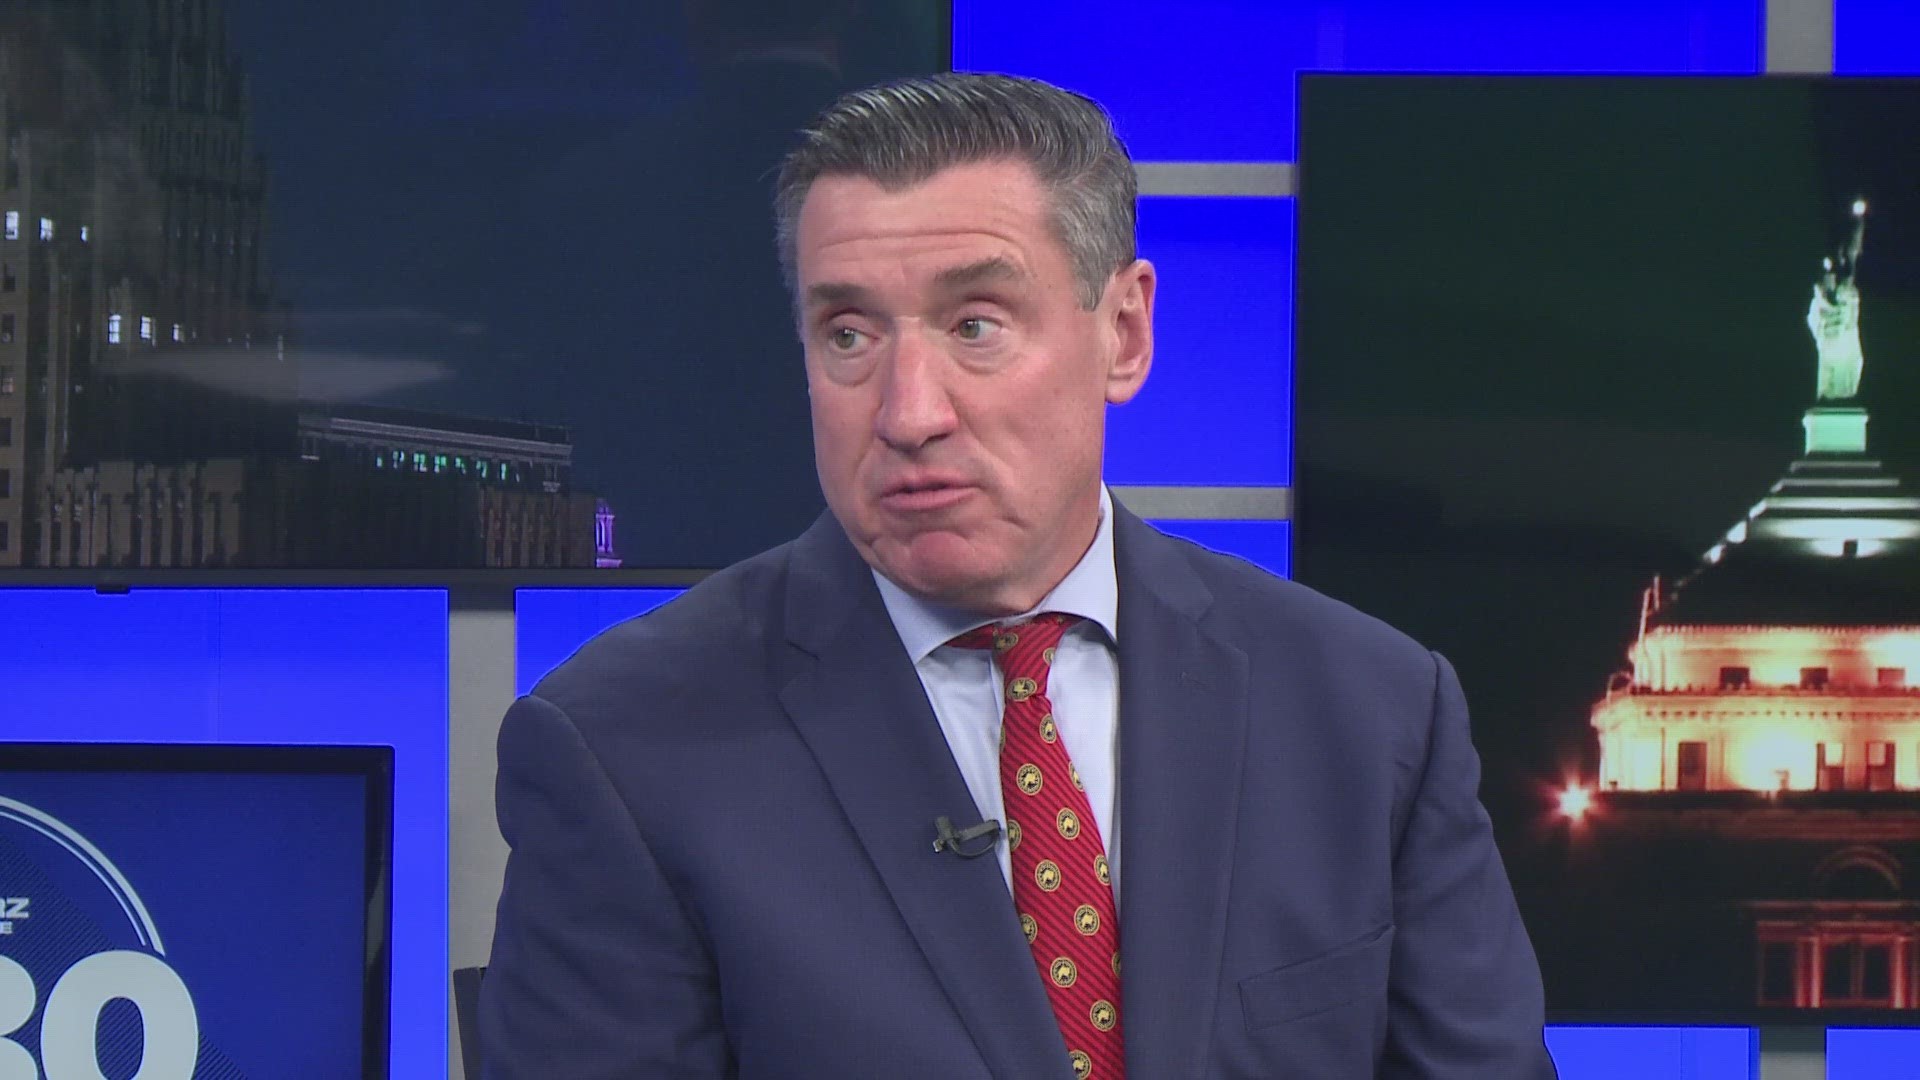 Erie County District Attorney John Flynn plans to step away, and he stopped by the studio to discuss his future.